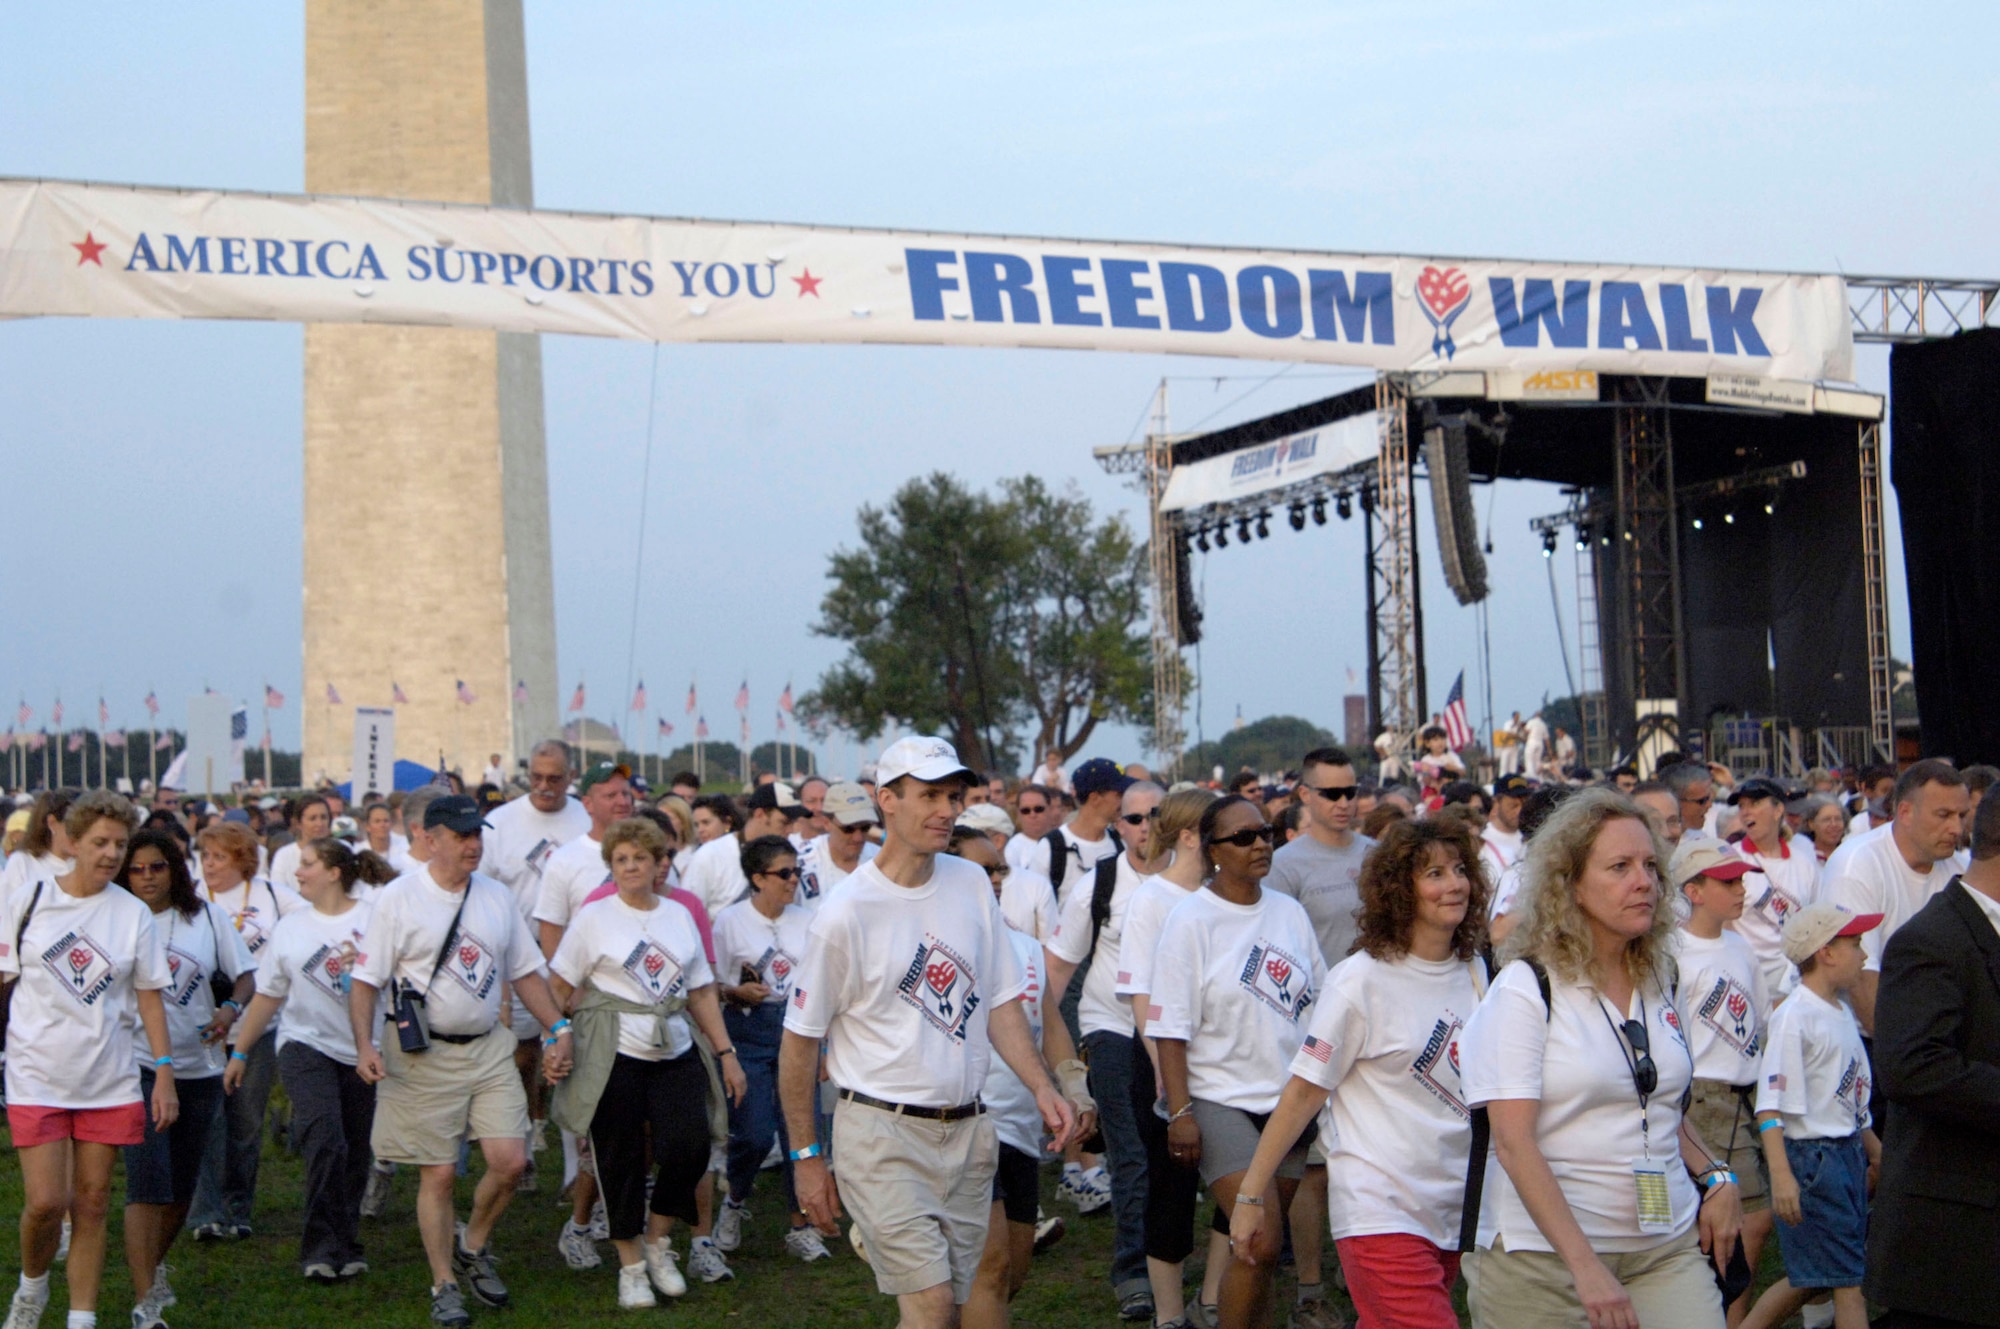 Thousands of participants start walking from the Washington Monument Sept. 10 to honor those who lost their lives Sept. 11, 2001, as a result of the terrorist attacks in New York, Washington and Pennsylvania. The walk concluded at the Pentagon where opera singer Denyse Graves performed. The Pentagon was then illuminated with 184 beams of light to commemorate the 184 lives who were lost at the Pentagon. (U.S. Air Force photo/Tech. Sgt. Cohen A. Young) 